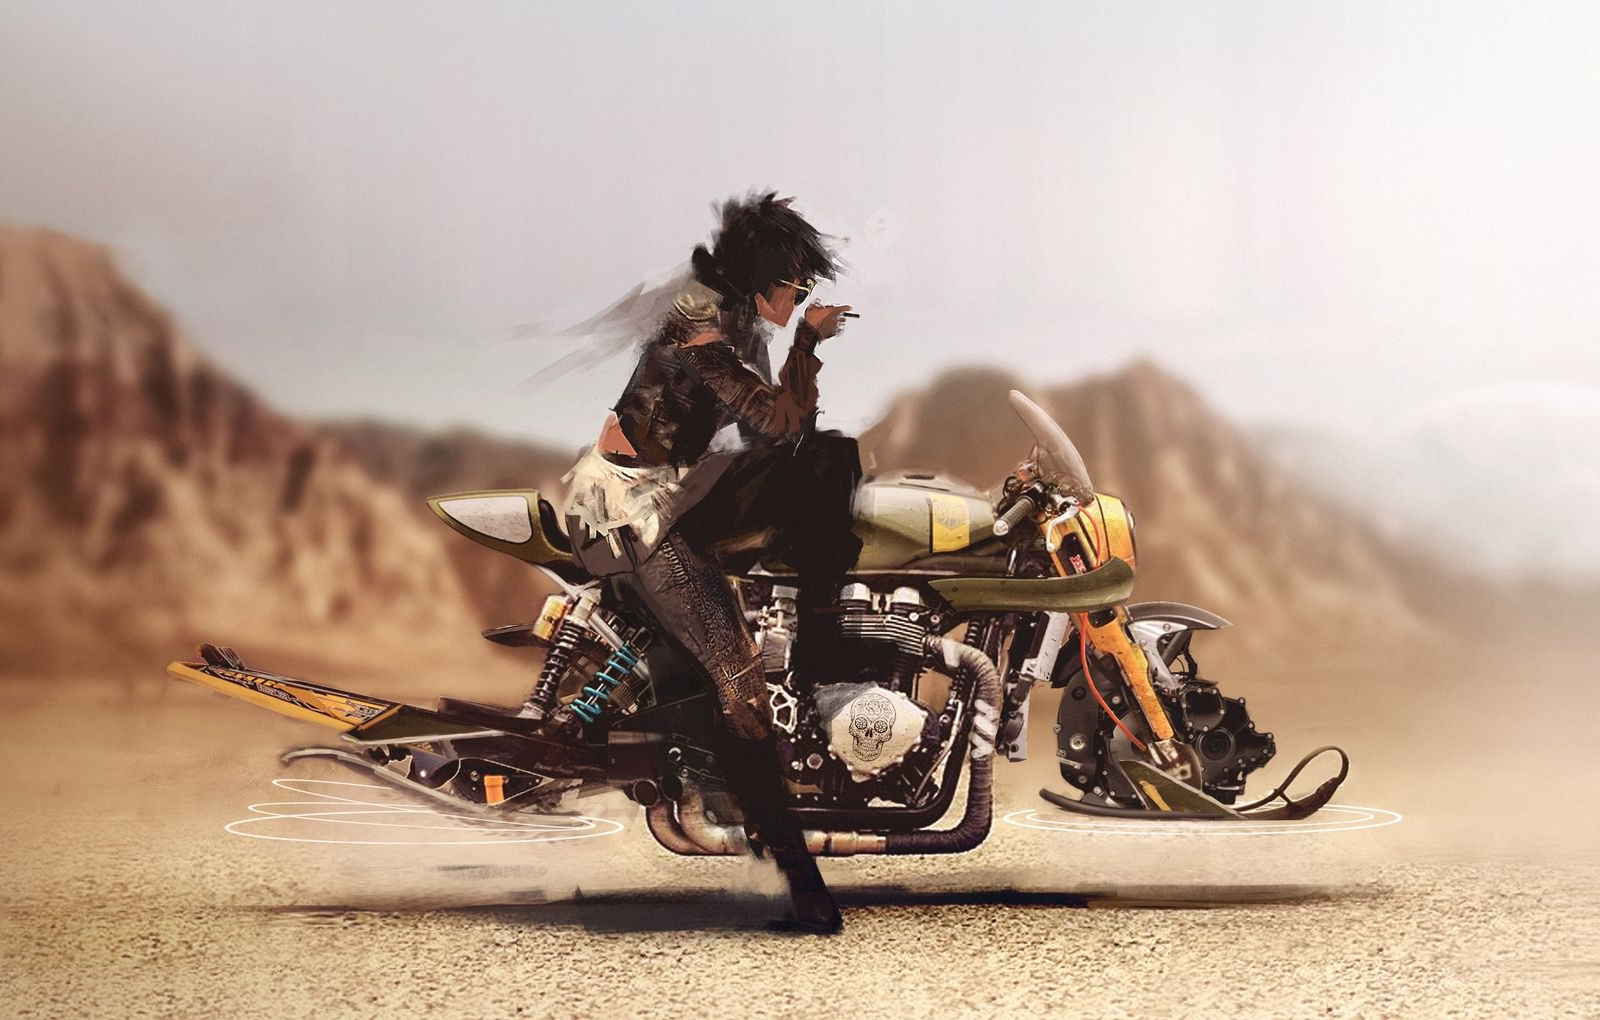 beyond good and evil wallpaper,motorcycle,vehicle,motorcycling,extreme sport,racing